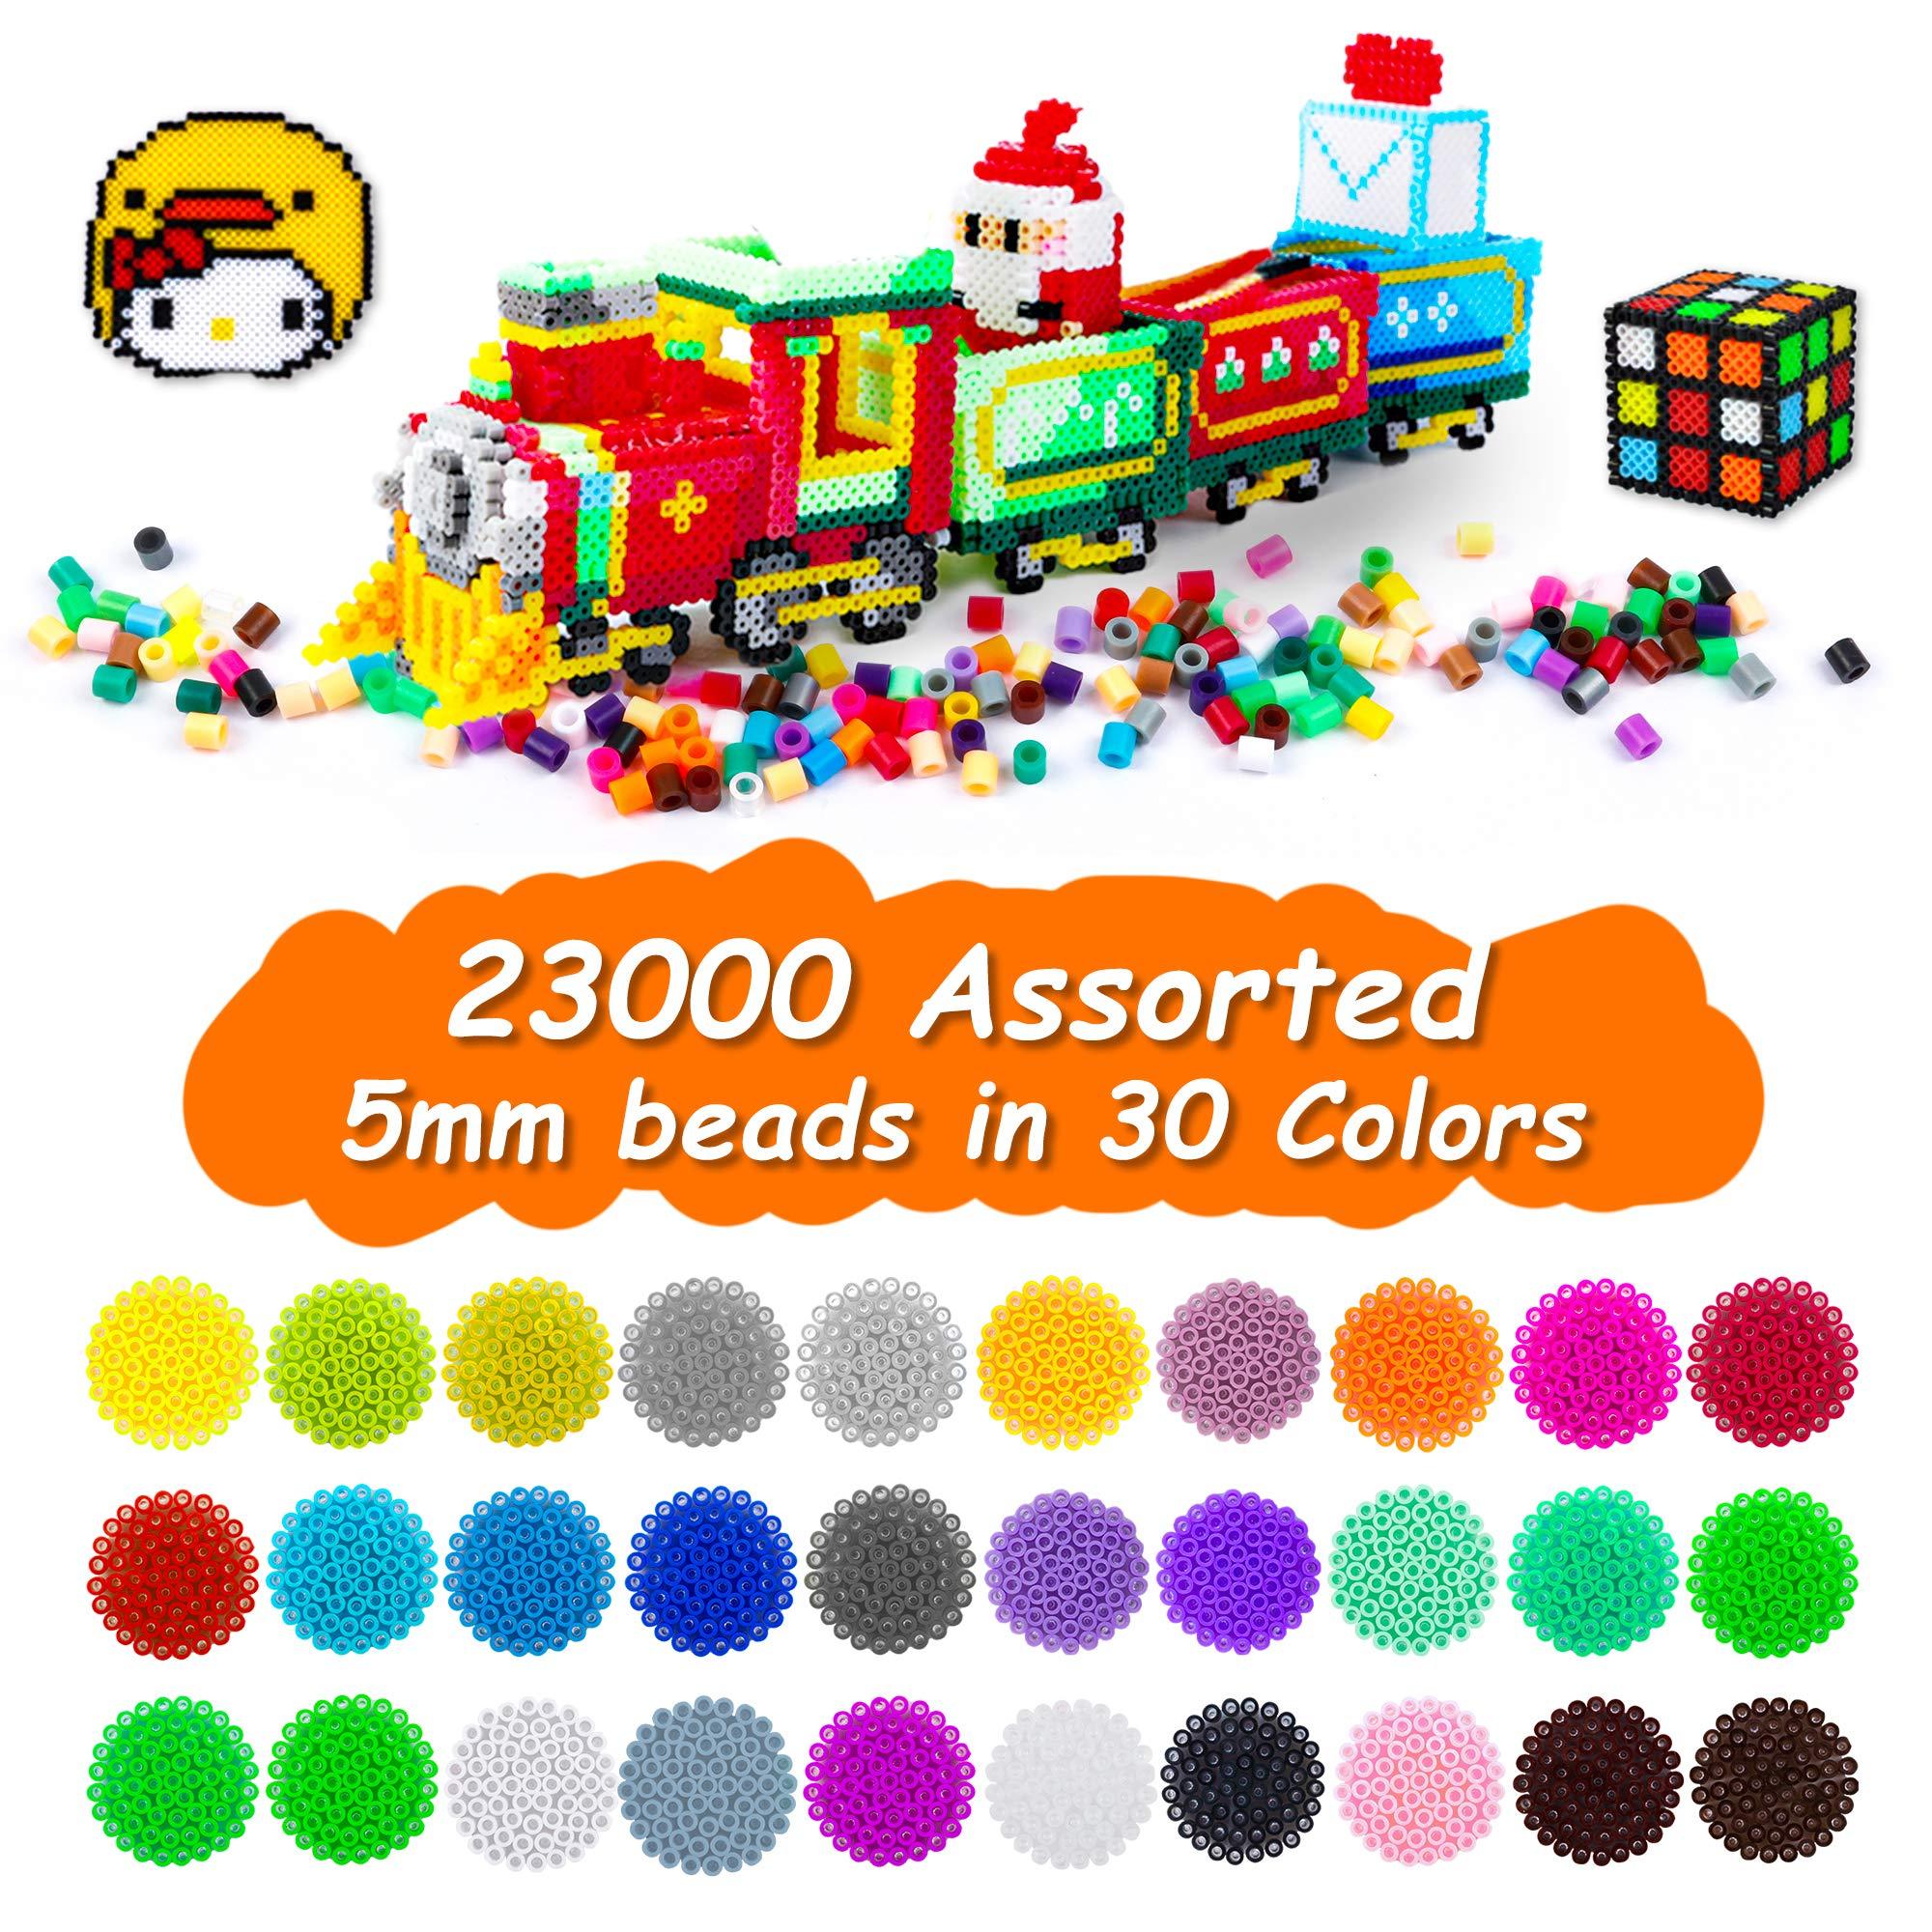 23,000 pcs Fuse Beads Kit for Kids Crafts, 30 Colors Iron Beads